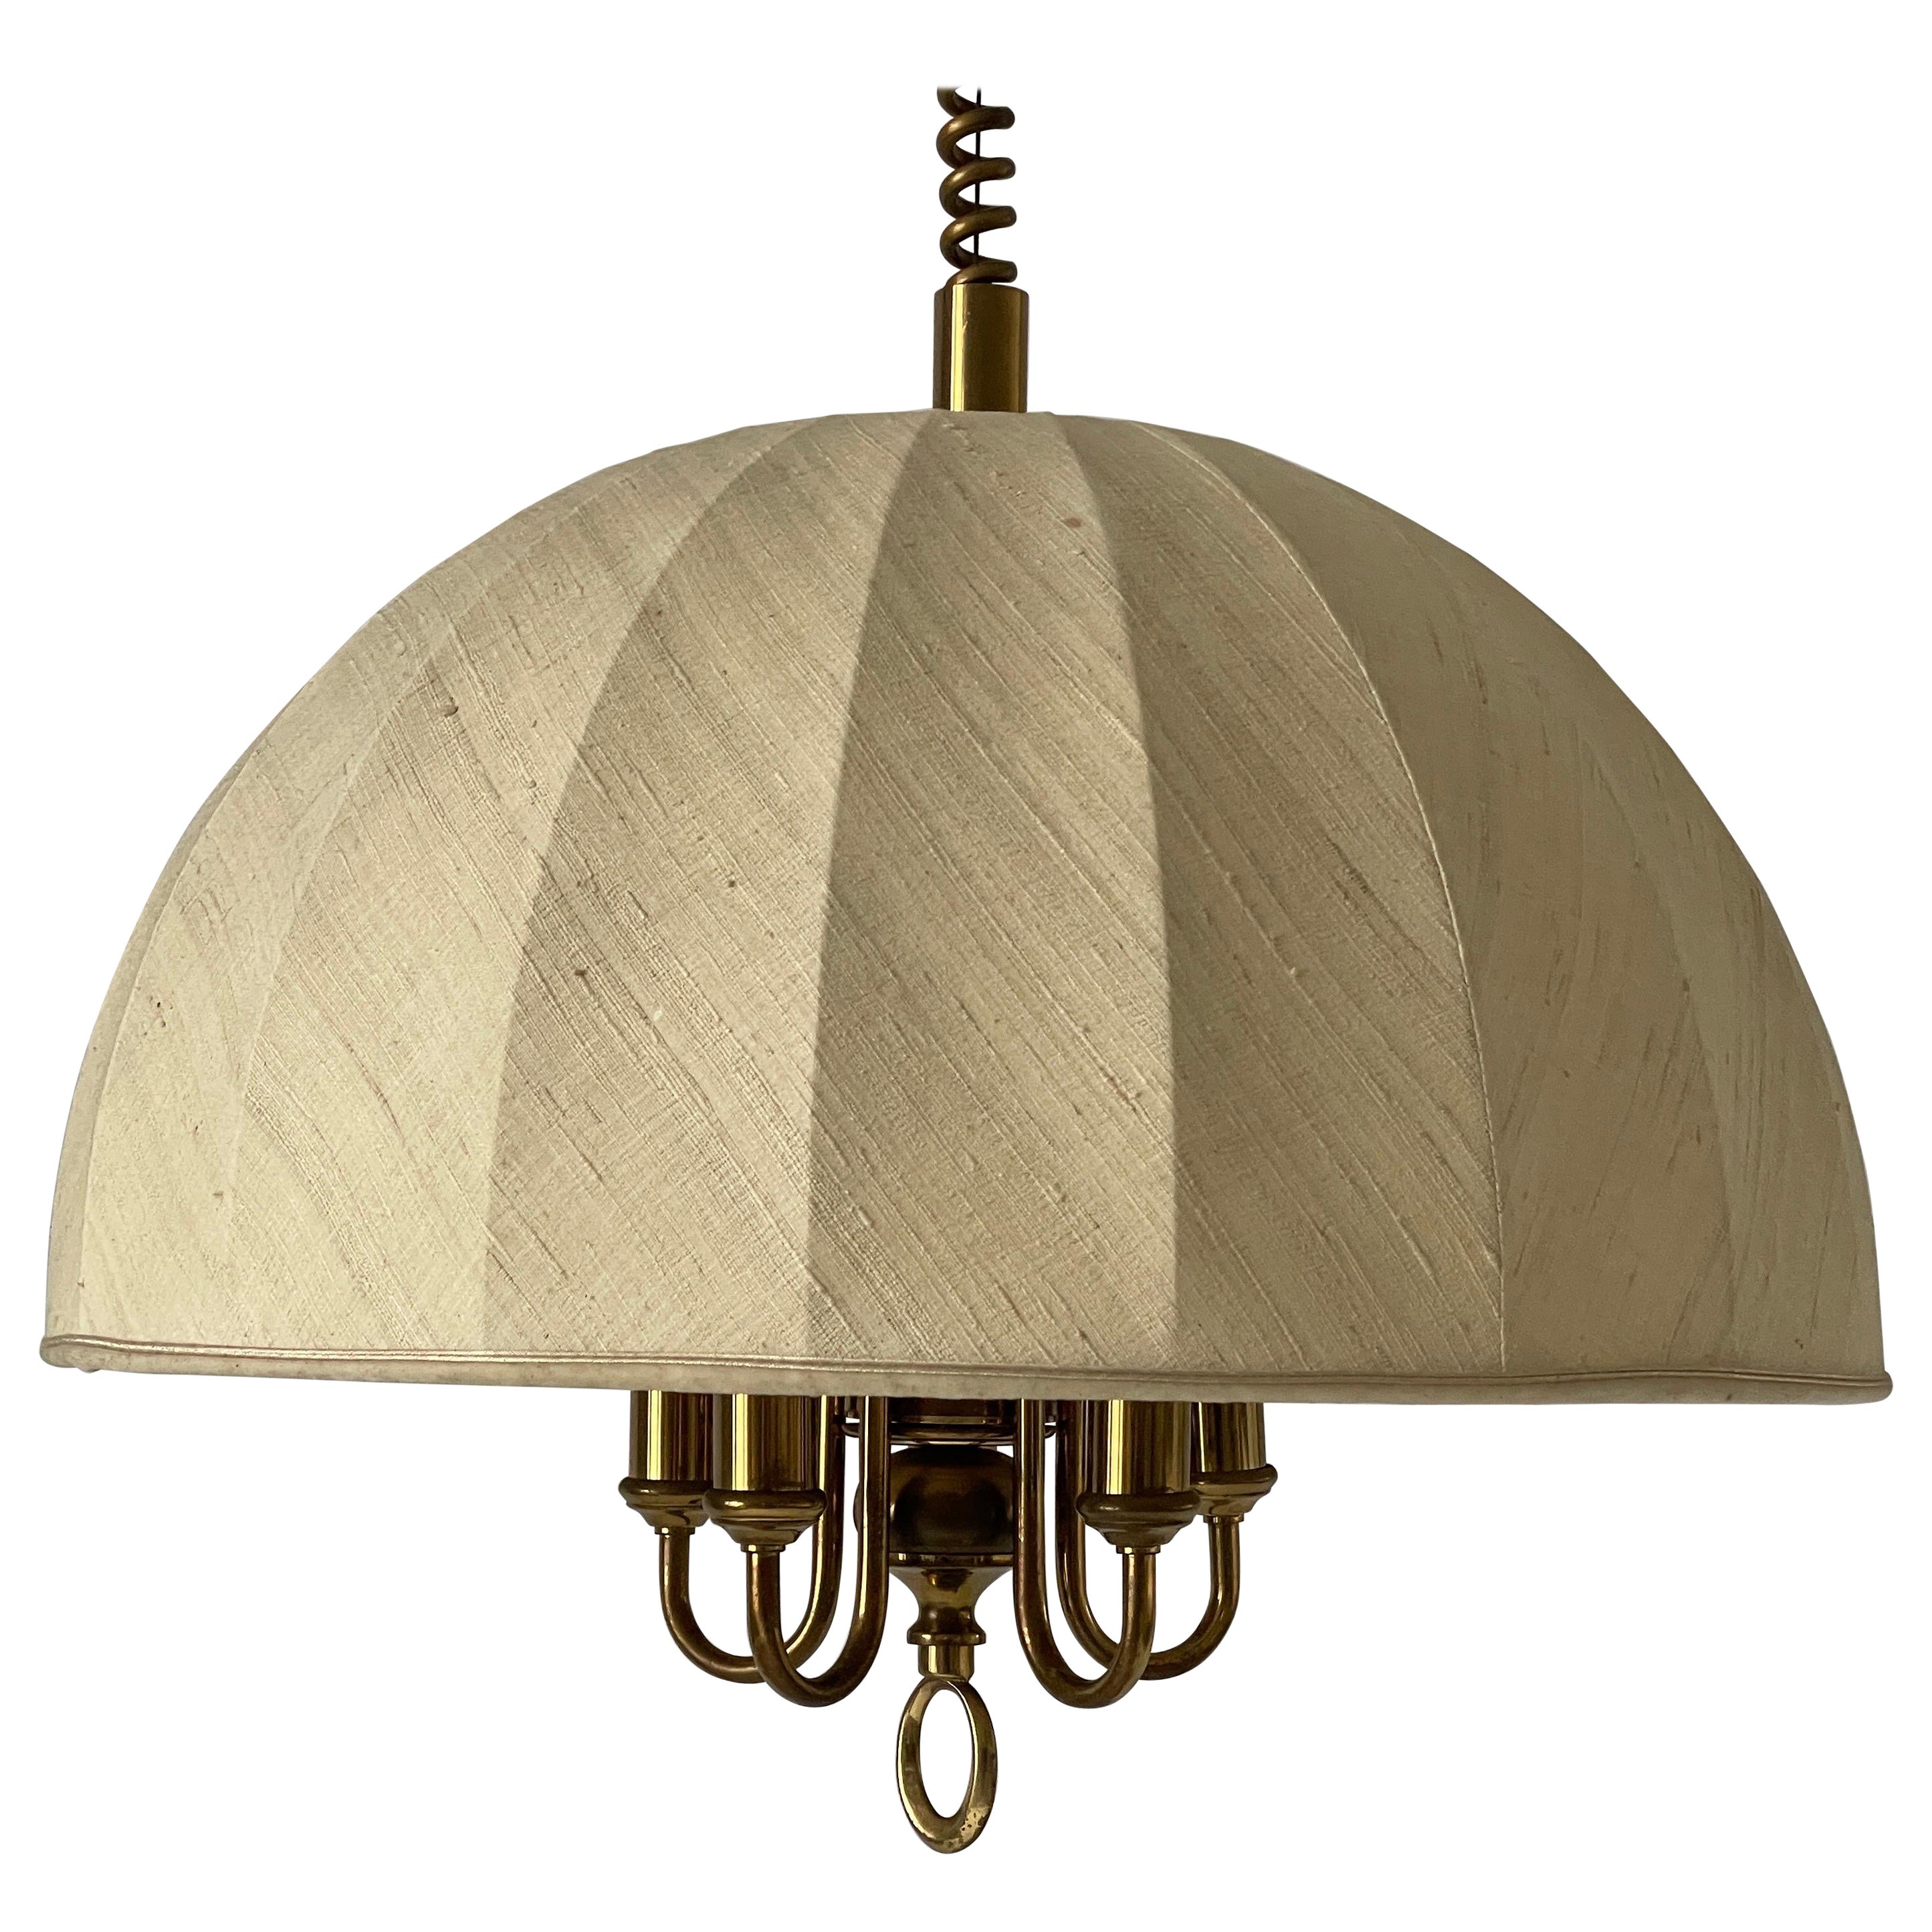 Fabric and Brass 5 socket Adjustable Shade Pendant Lamp by WKR, 1970s, Germany For Sale